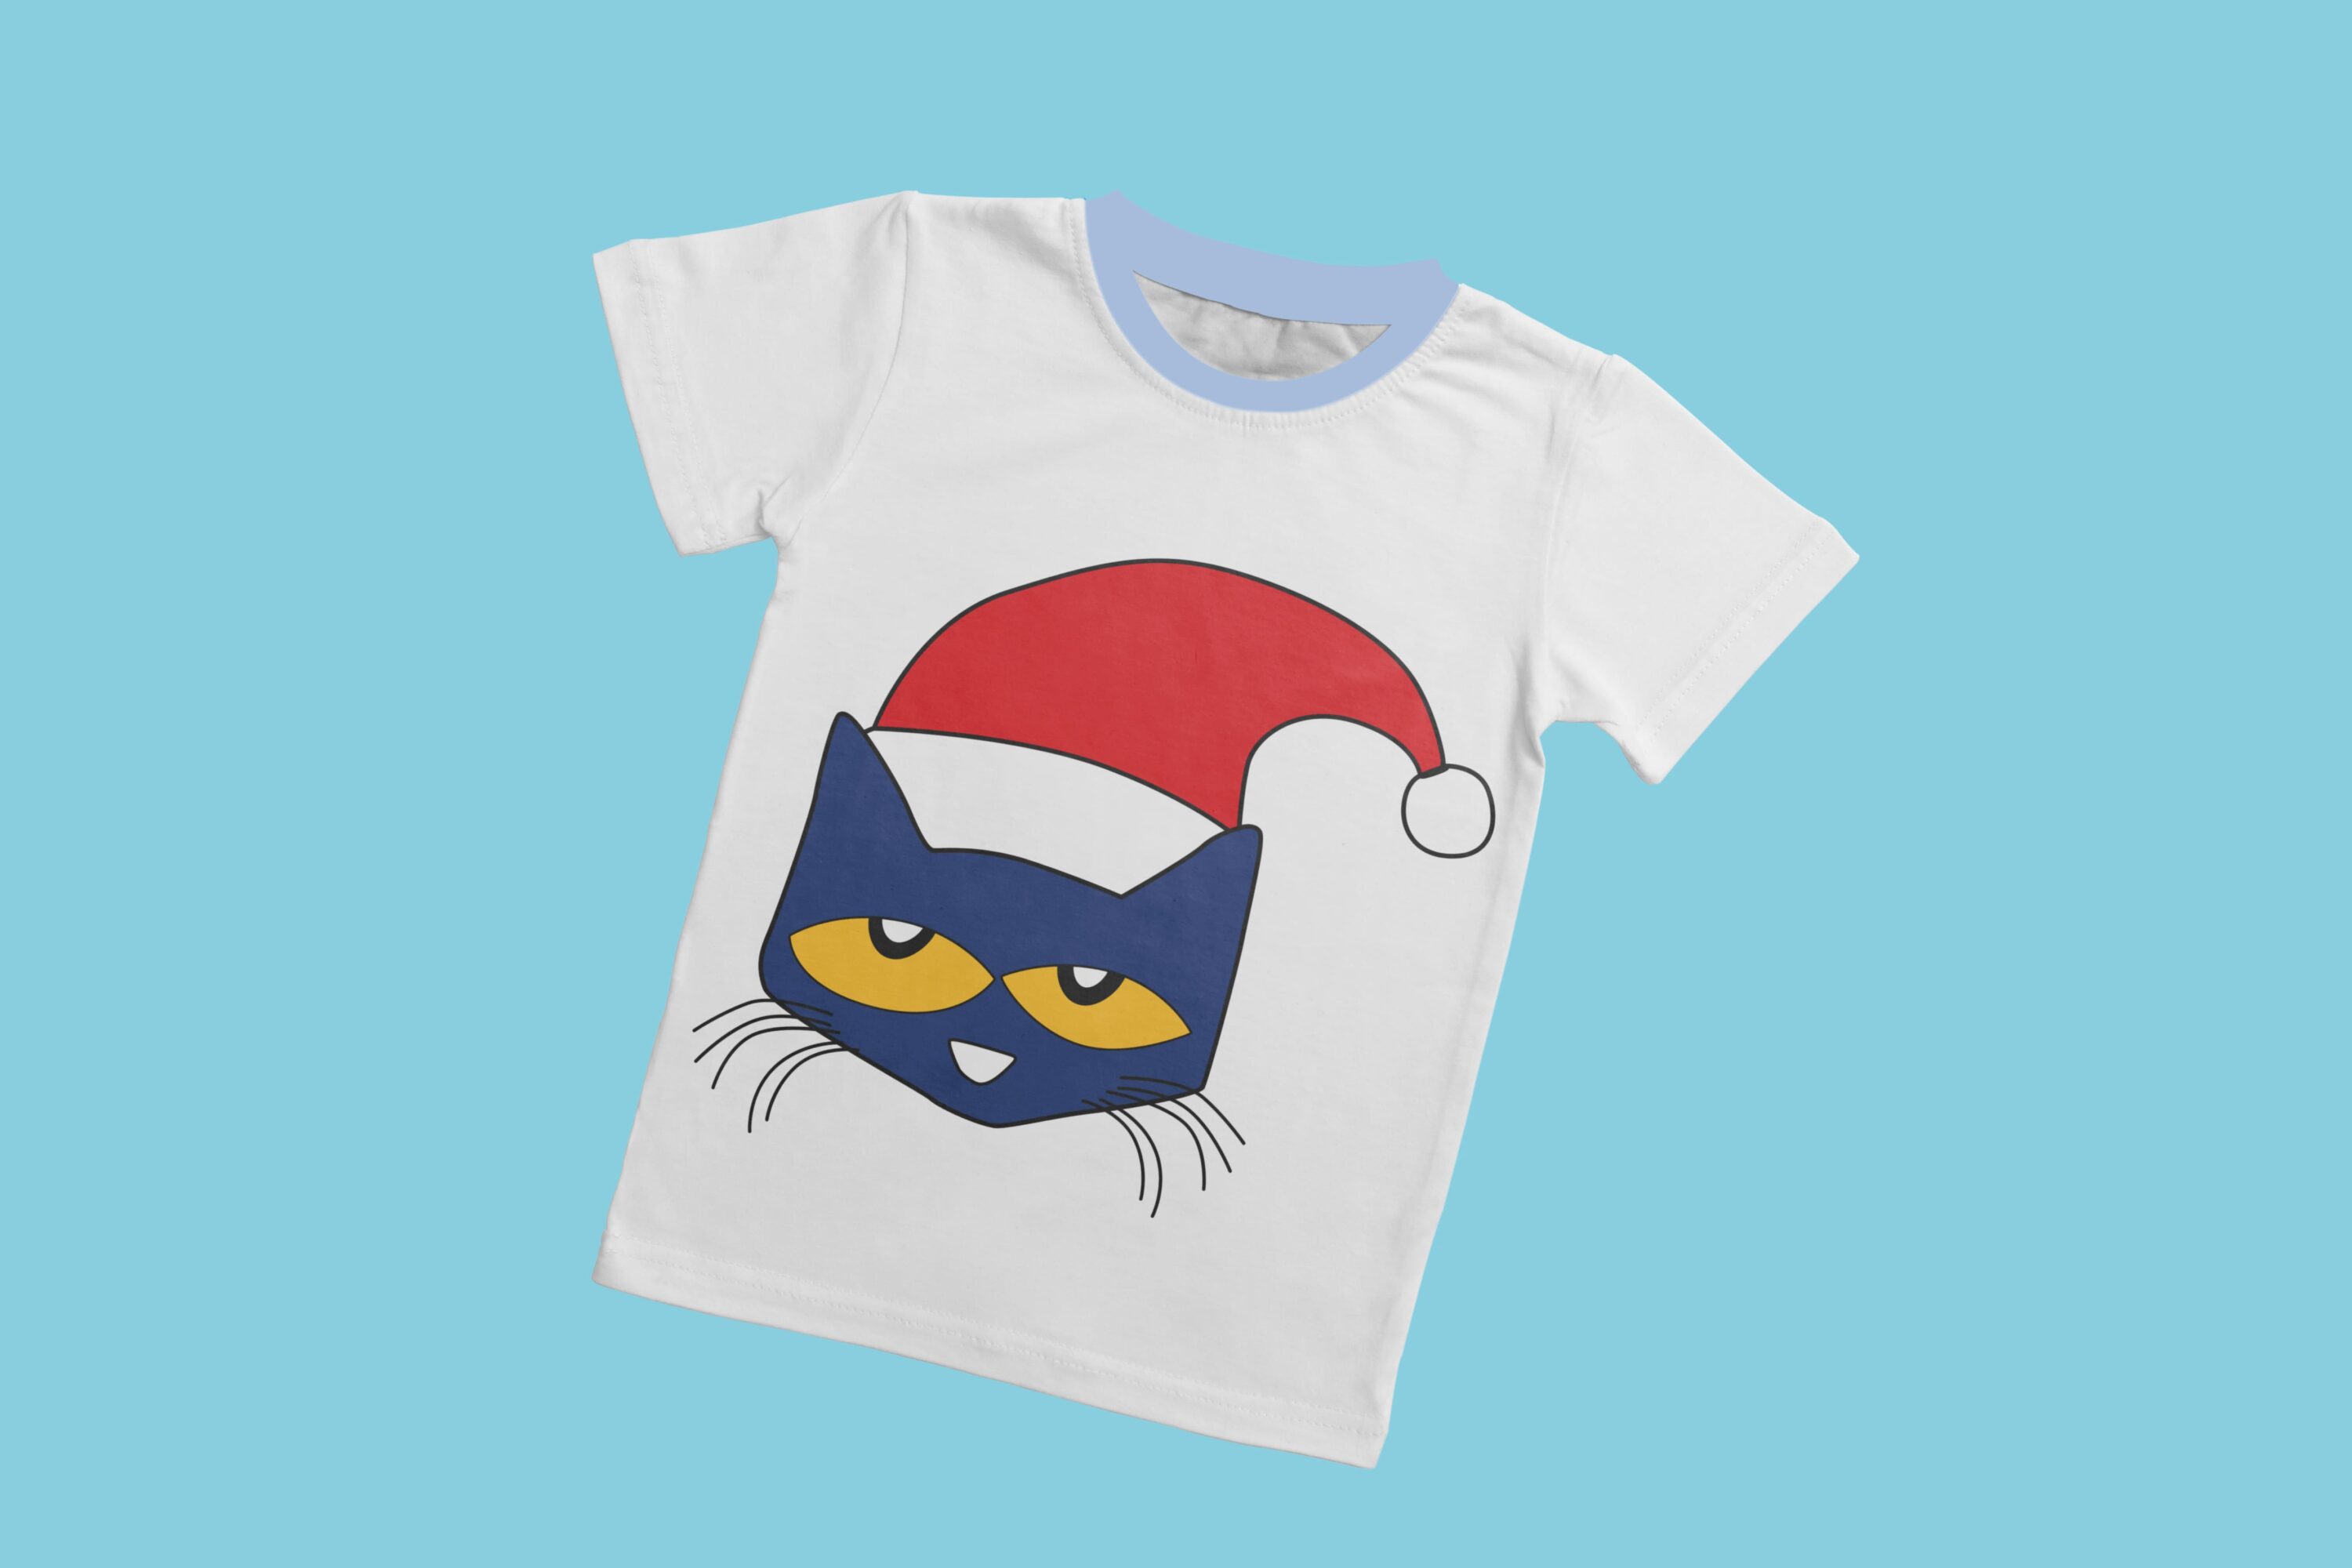 A white t-shirt with a light blue collar and the face of Pete the cat with yellow eyes and a red Christmas cap.